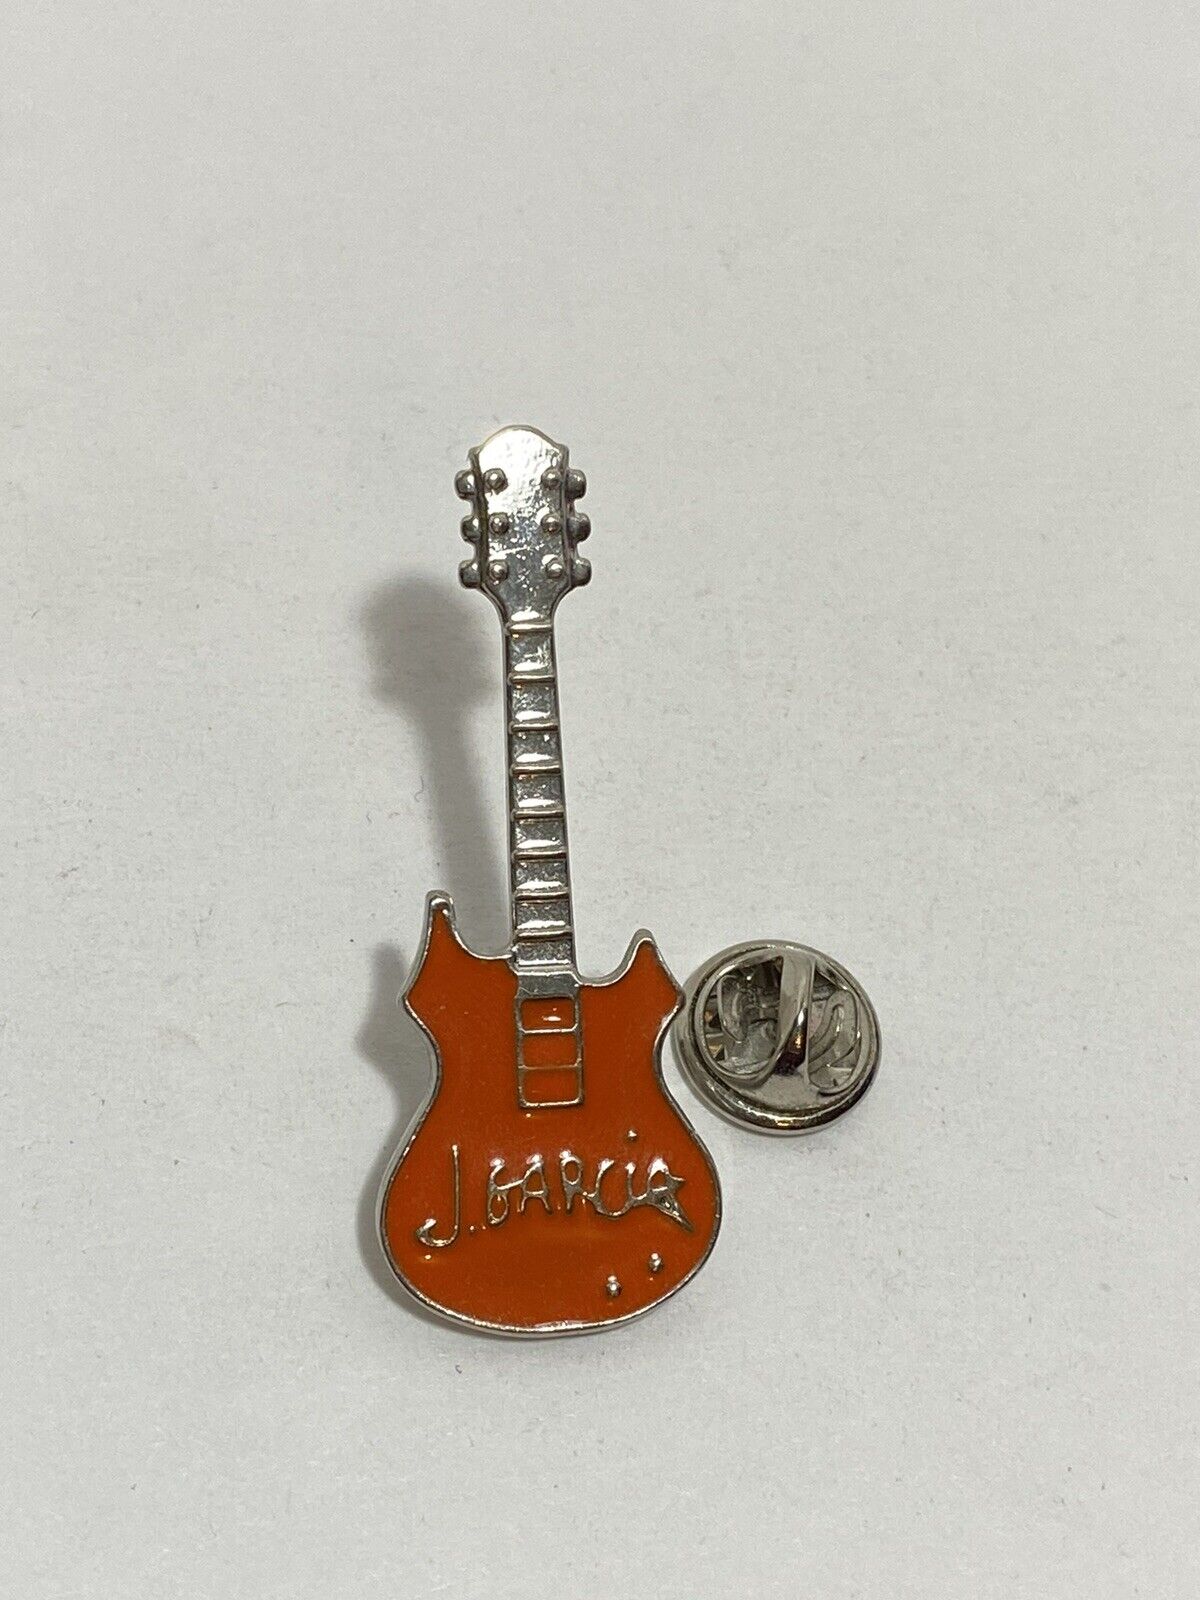 J. Jerry Garcia Red Silver Guitar Enameled Collectors Pin Tie Tack Grateful Dead